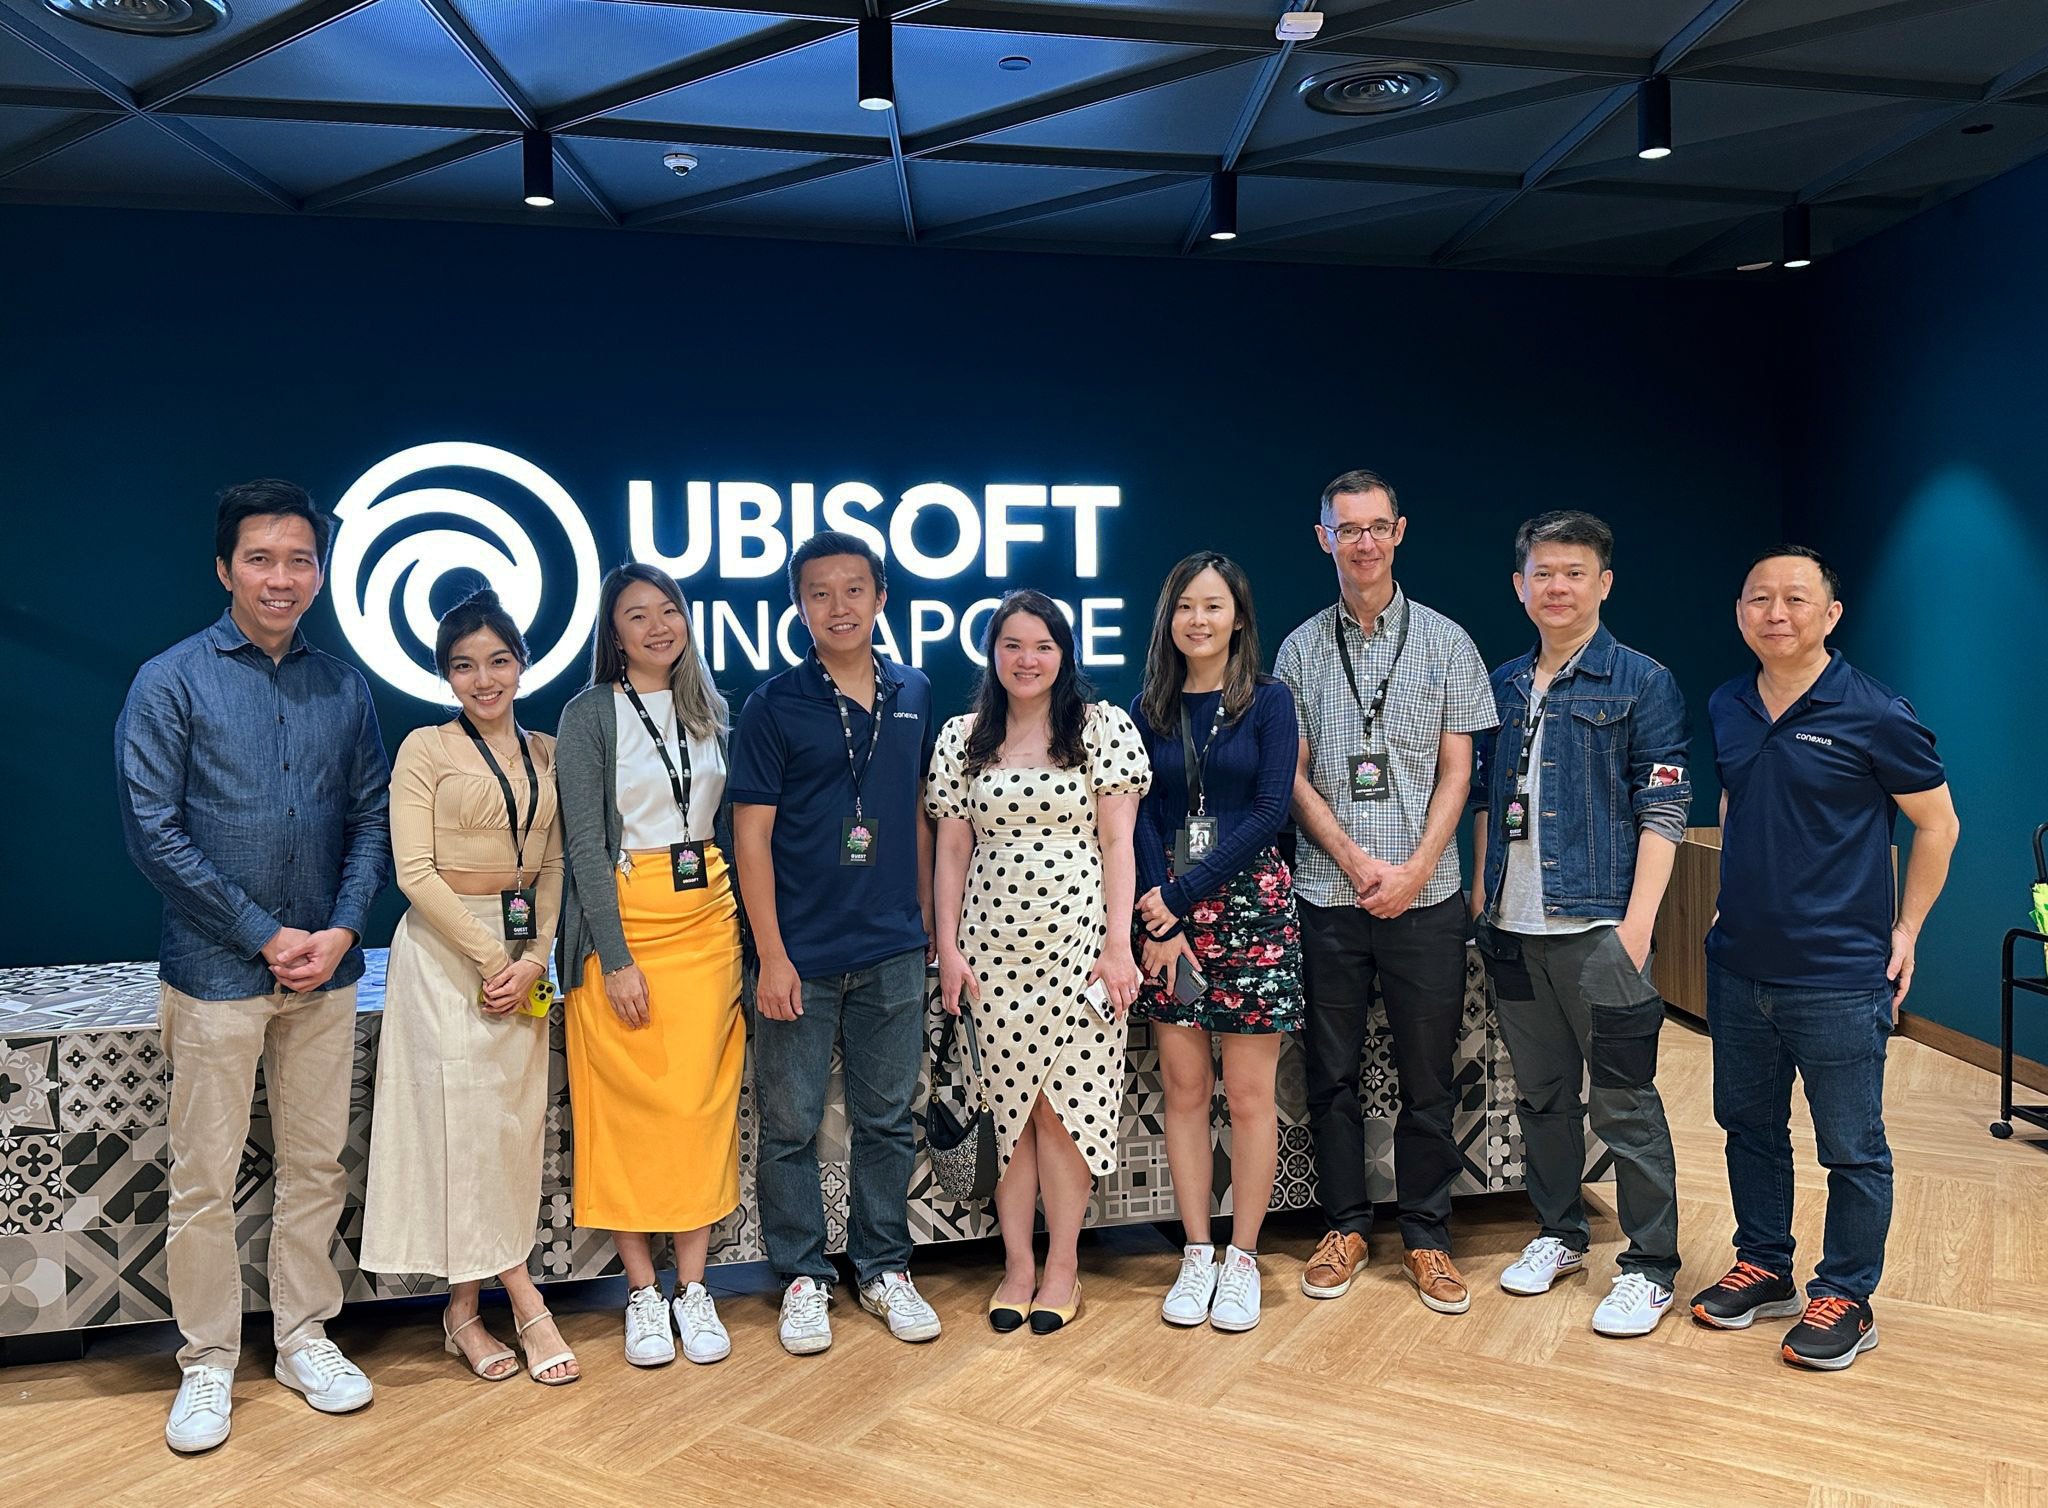  Ubisoft and Conexus Team group photo at the end of the 15th Anniversary Celebration 